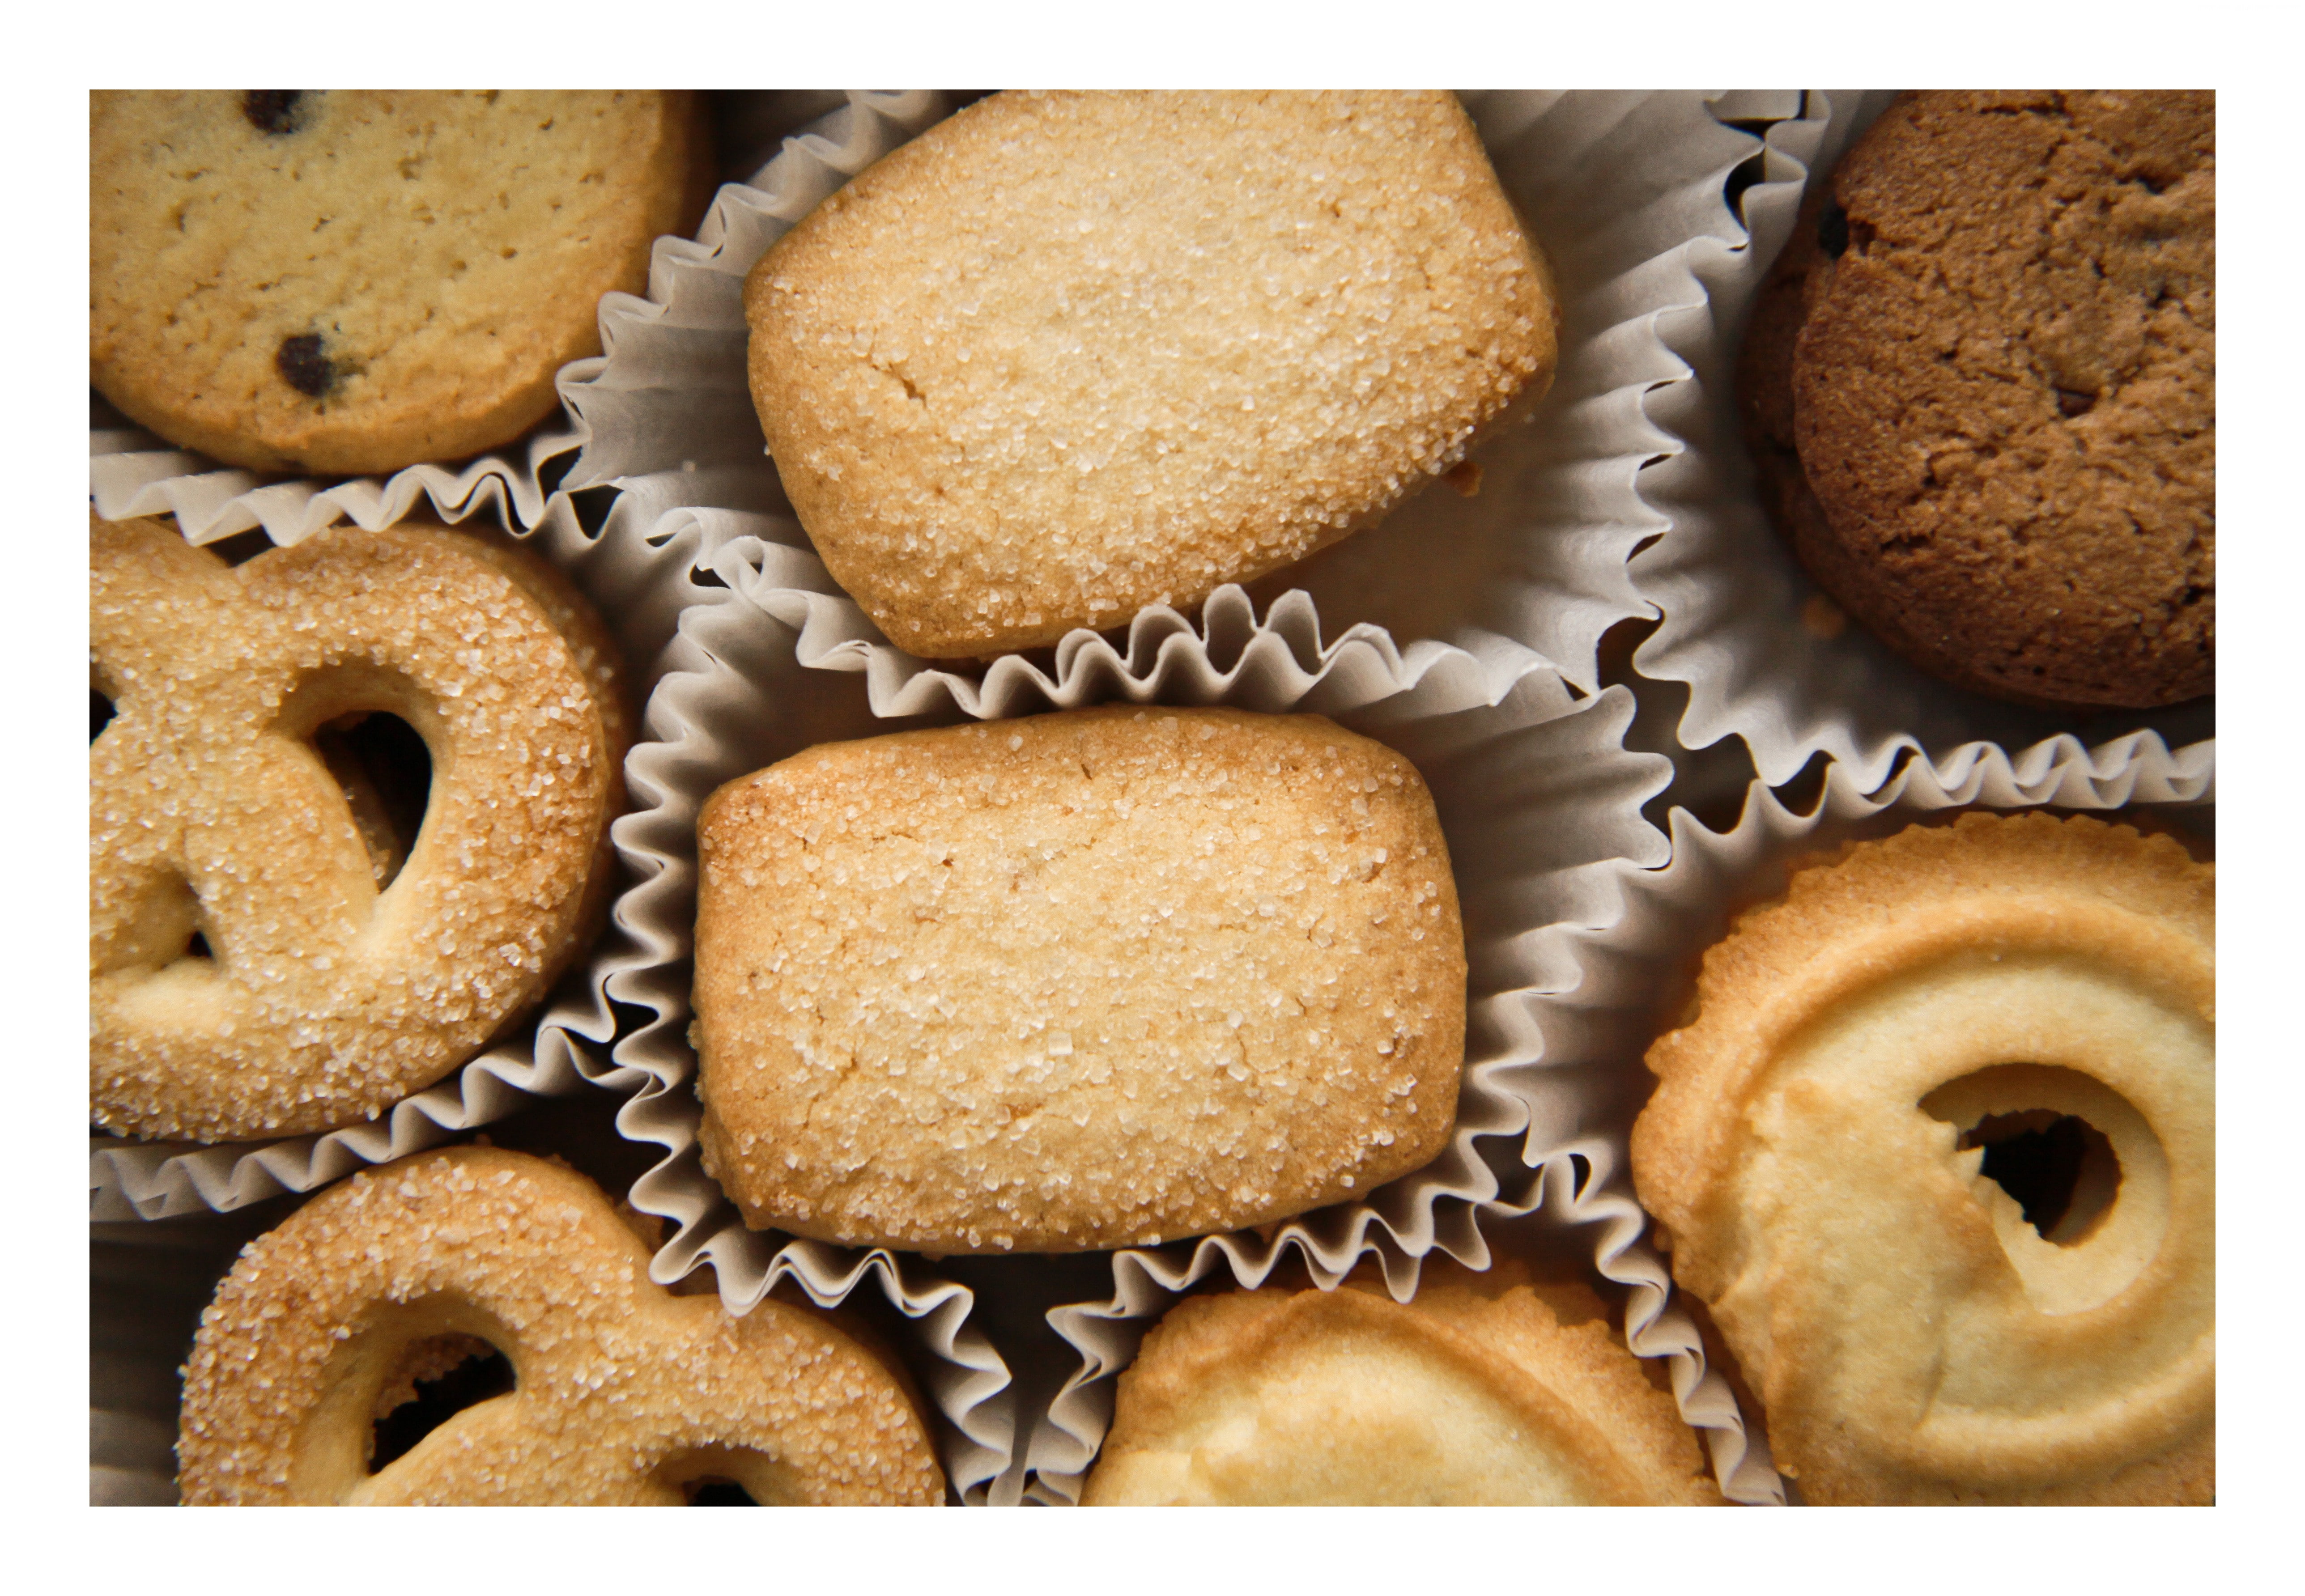 biscuits, sugar, shape, cooking, recipe, food, food and drink